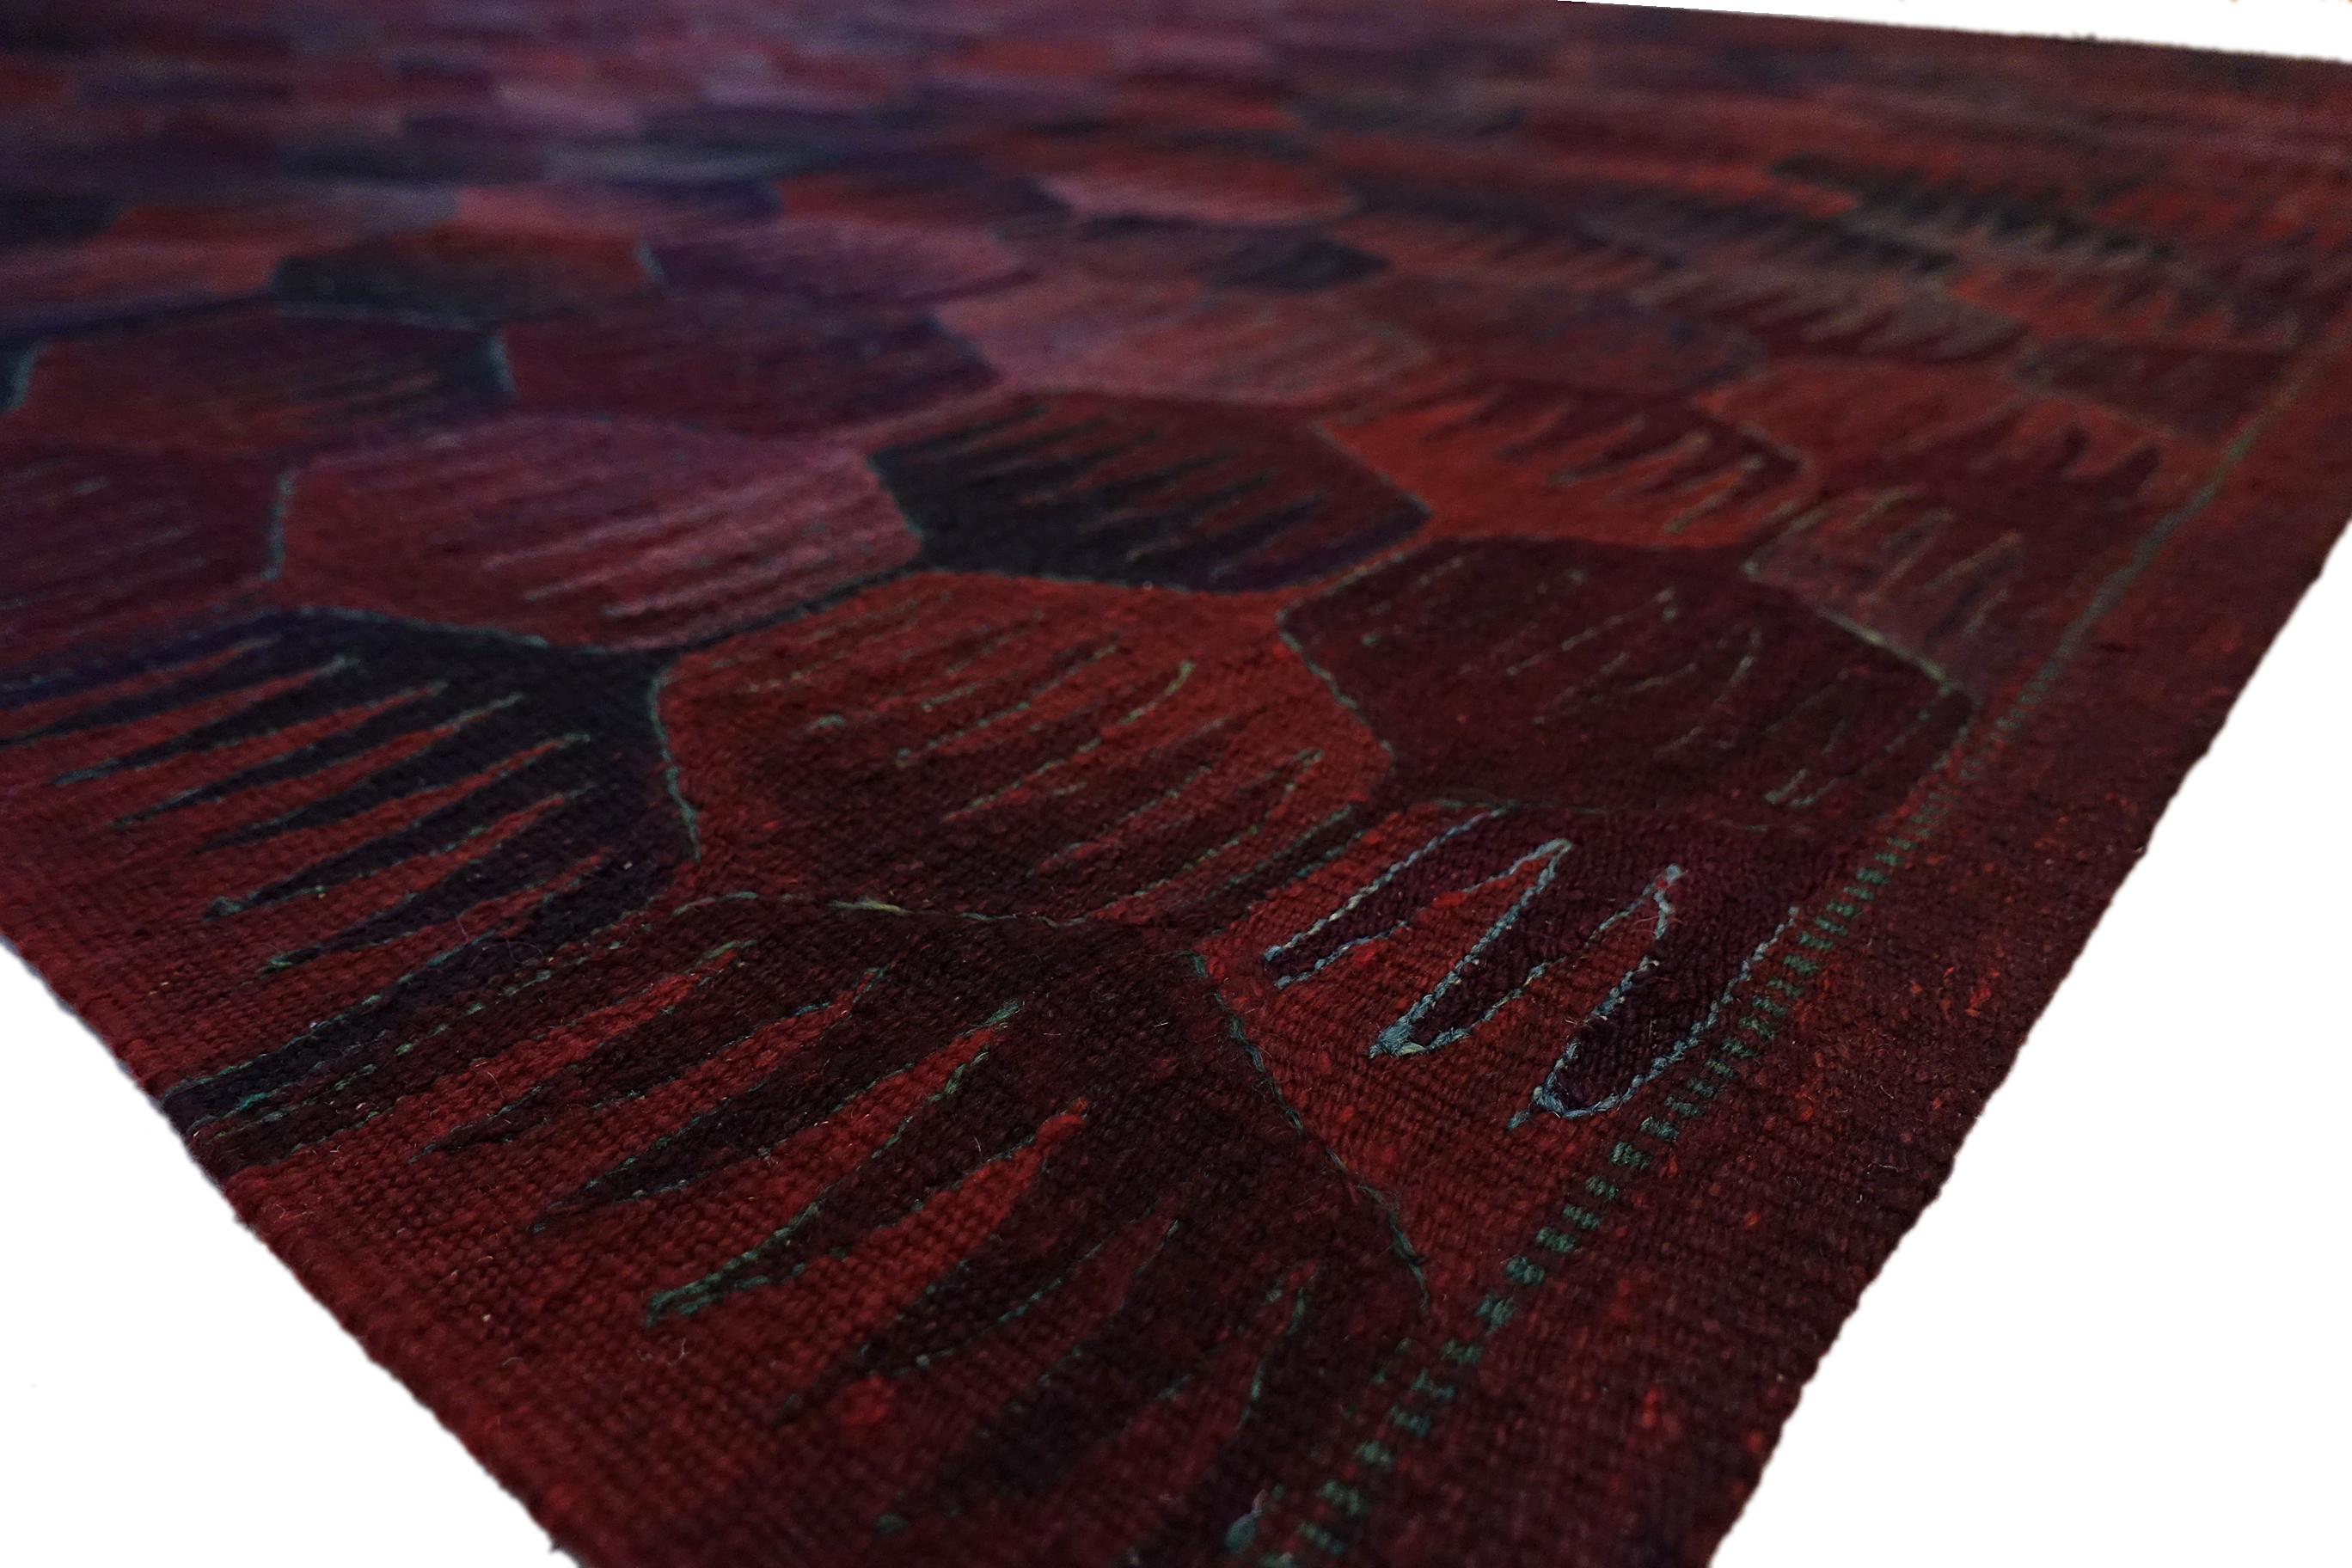 21st century modern handspun handwoven Anatolian wool Kilim carpet.

Wonderfully graphic and suitable for many modern furnishing styles. The kilim fits through its earth tones and yet abstract pattern to many furnishings and enlivens any room.